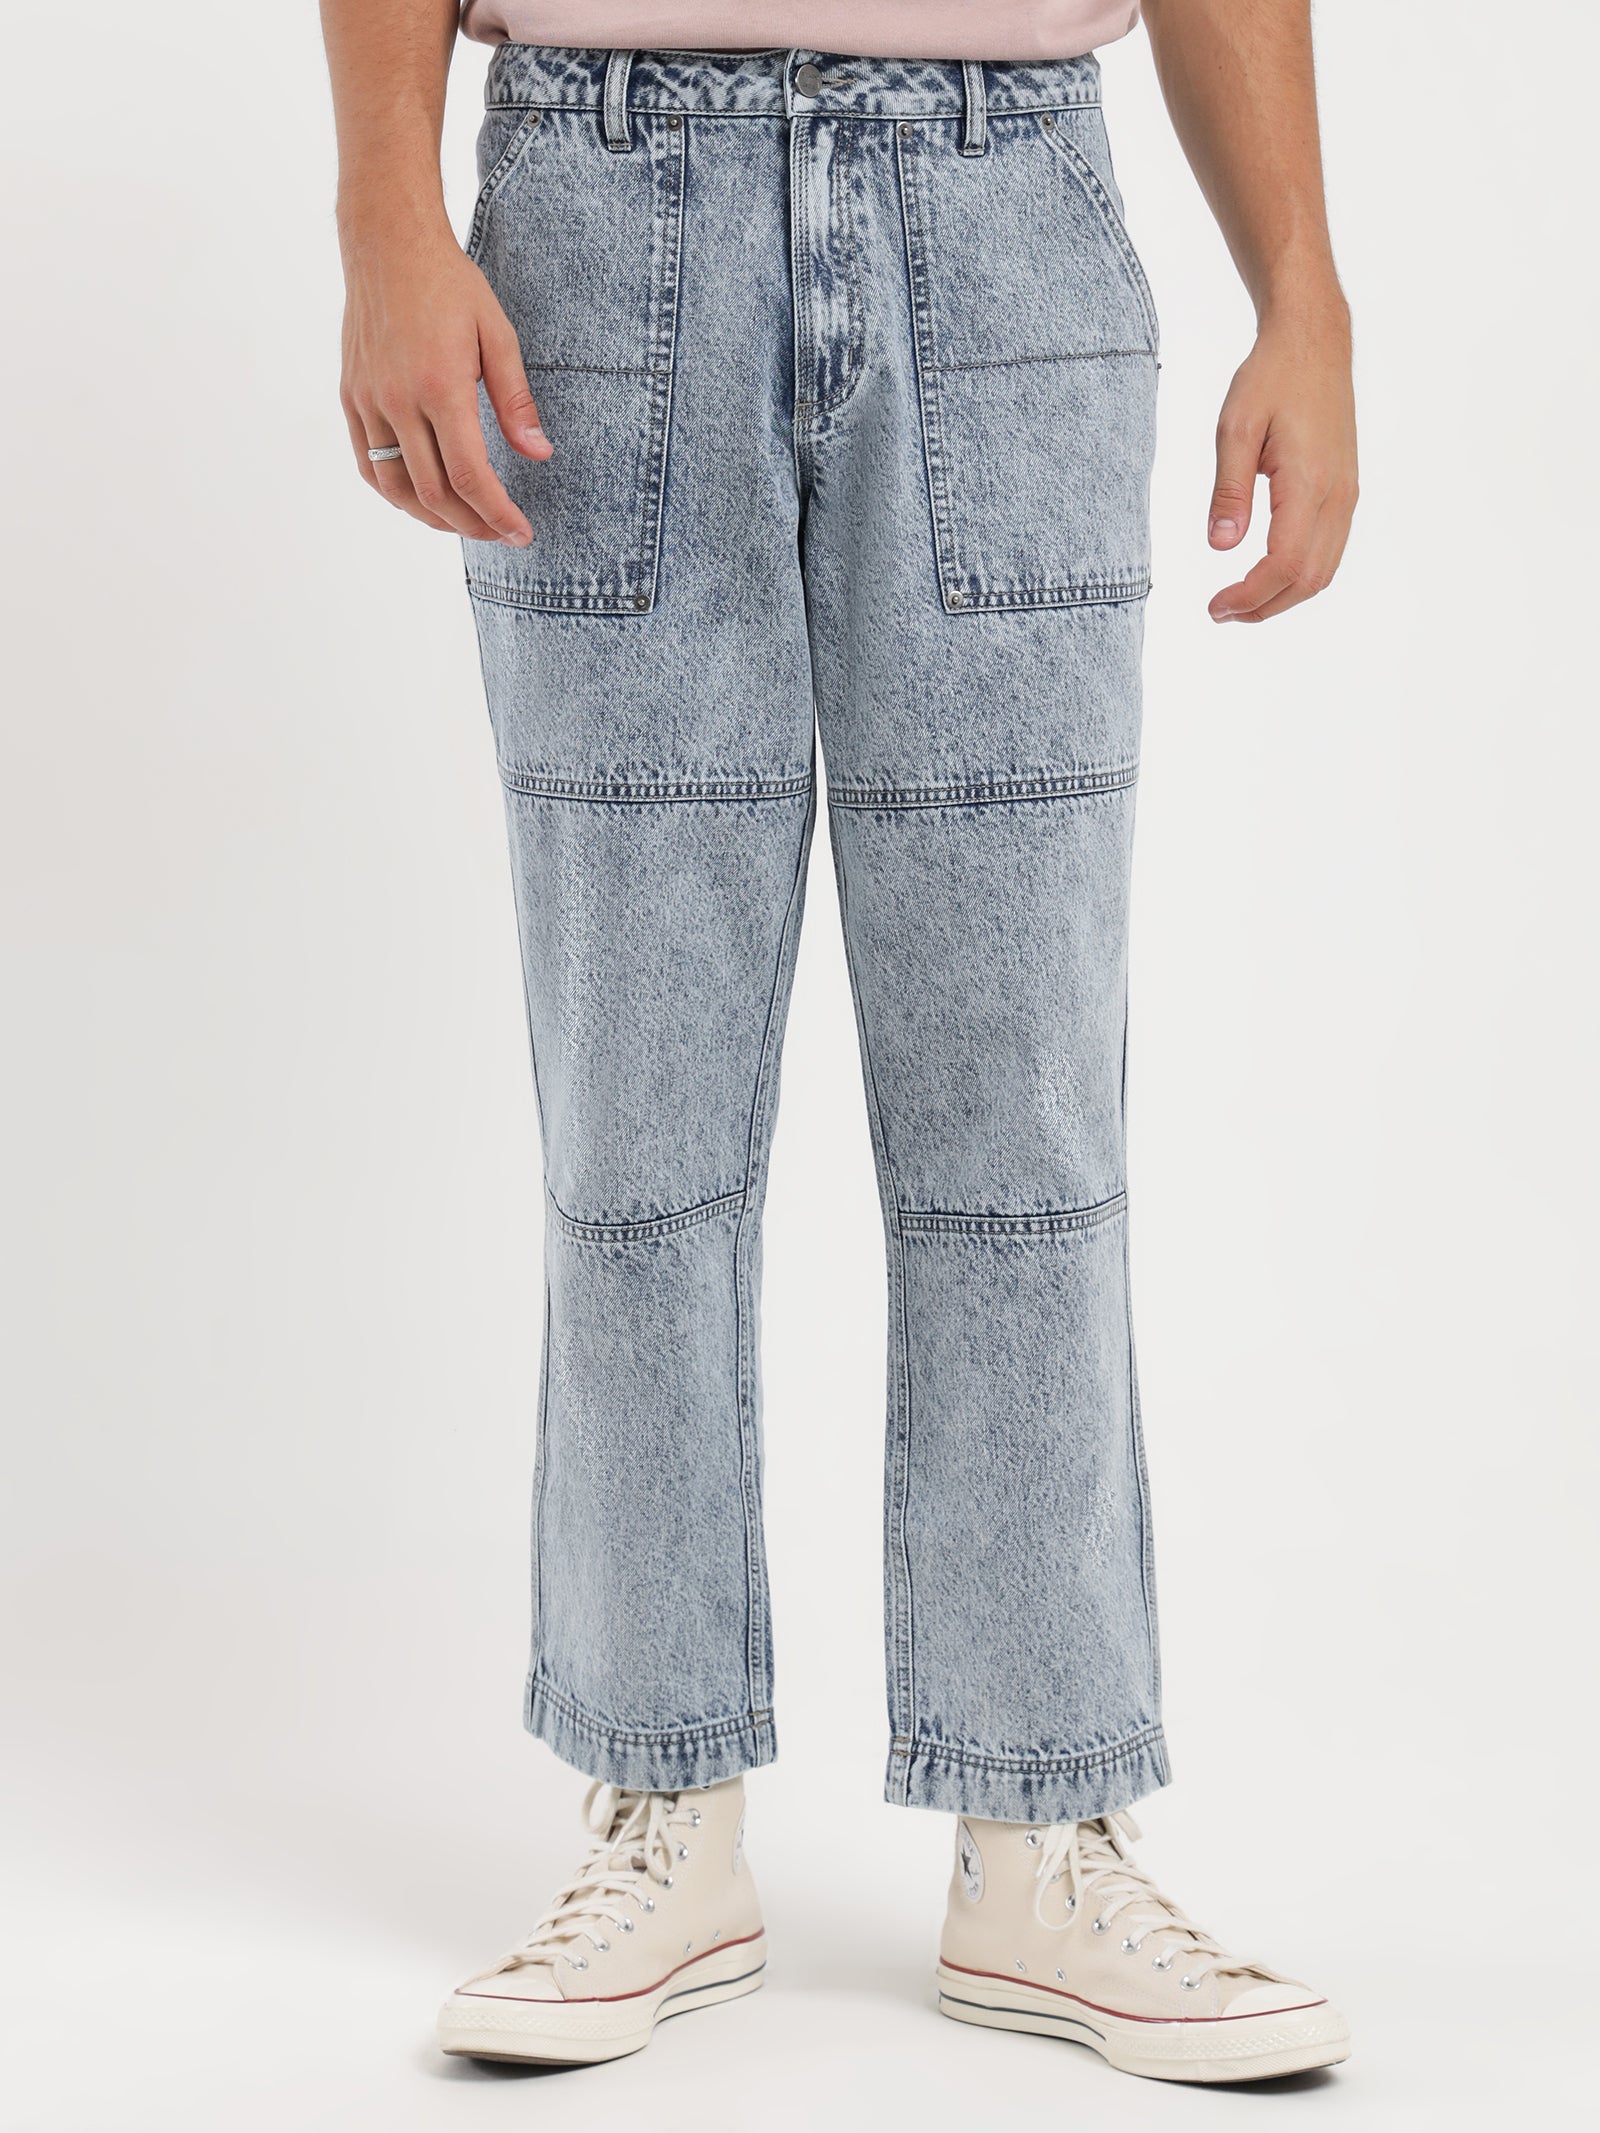 Anarchy Relaxed Jeans in Vintage Blue